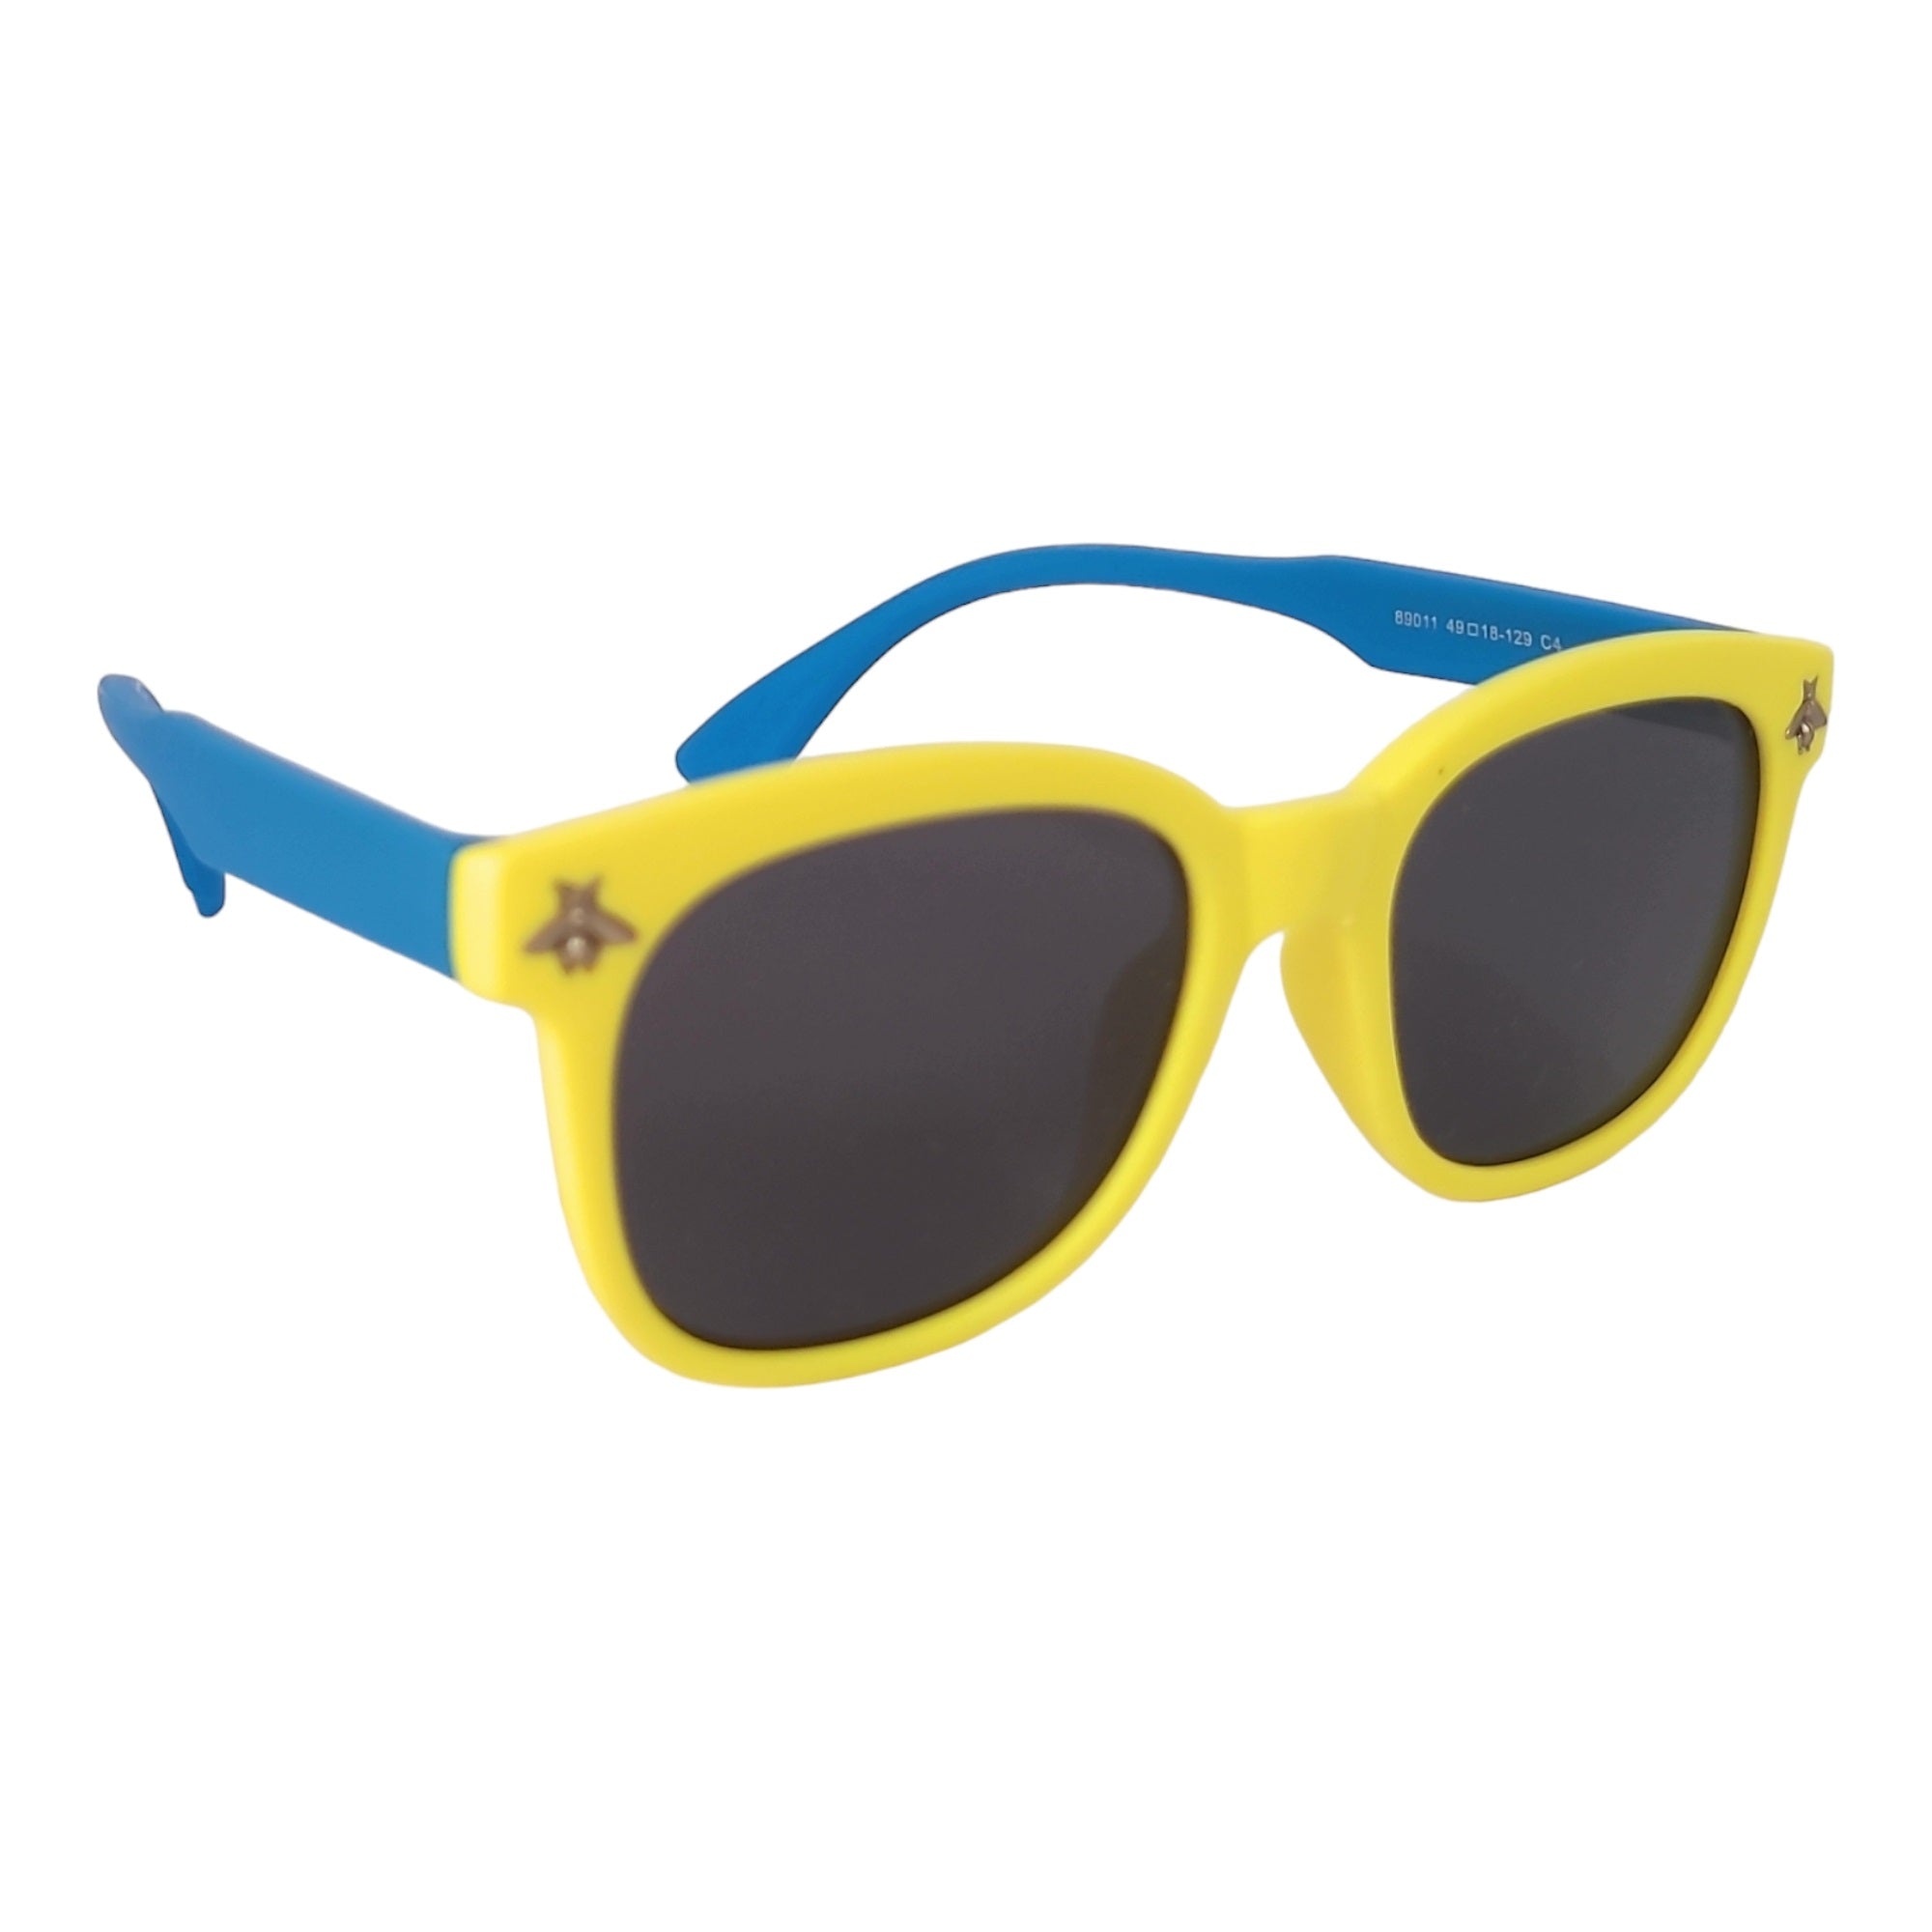 Kids Polarized Sunglasses for Children Age 4-9 Years Old, Girl or Boy |  affaires-9007-Green – SoftTouchLenses